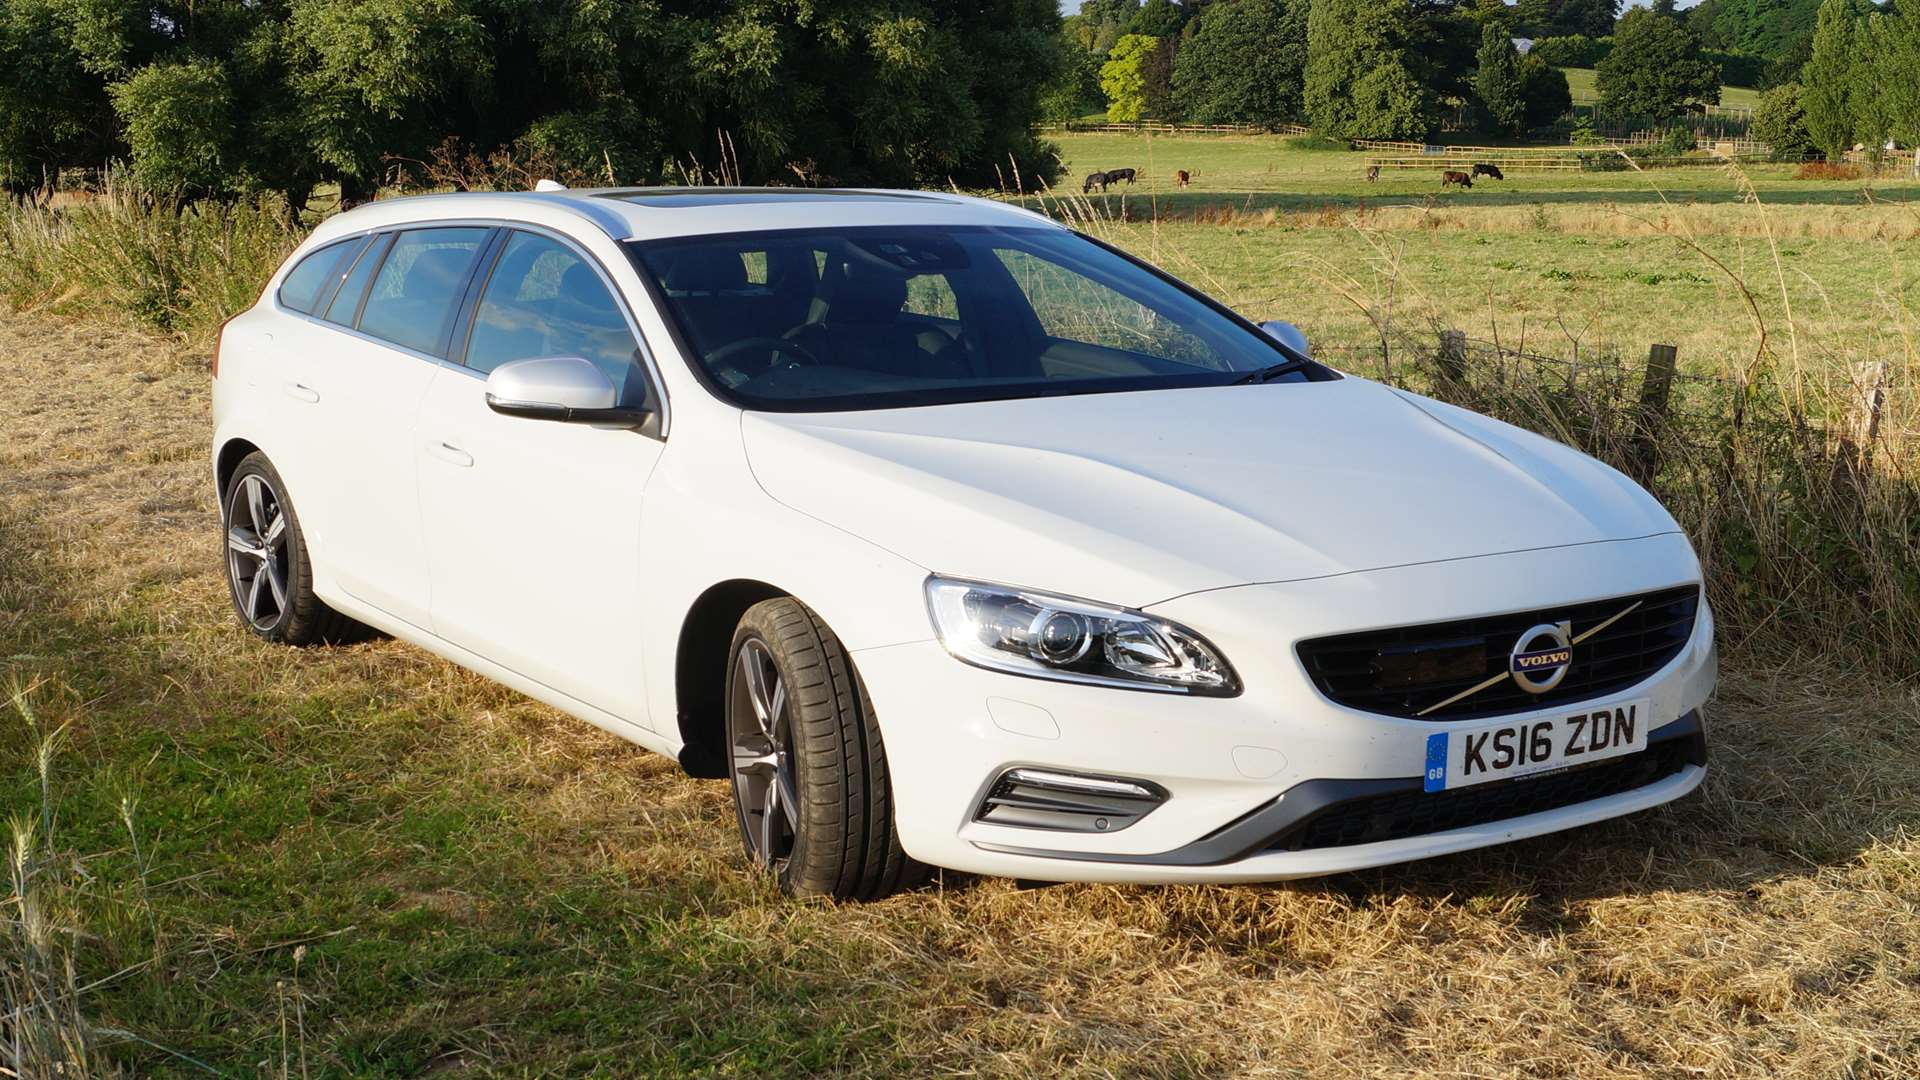 The V60 is one of the best-looking cars on the road